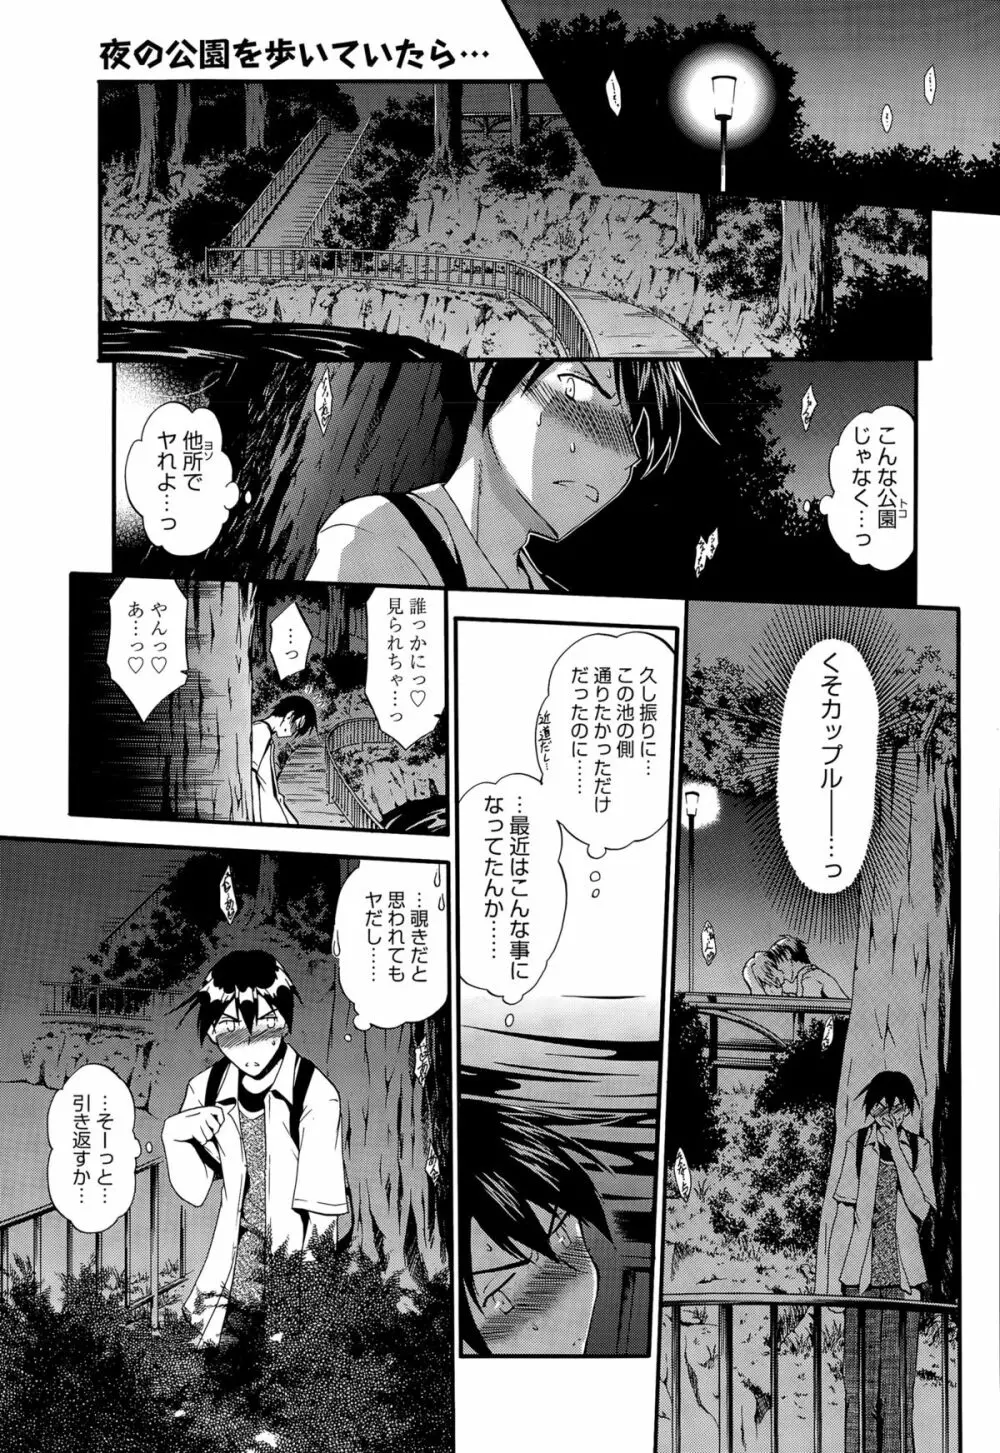 honesty Ronder 第1-2話 Page.1